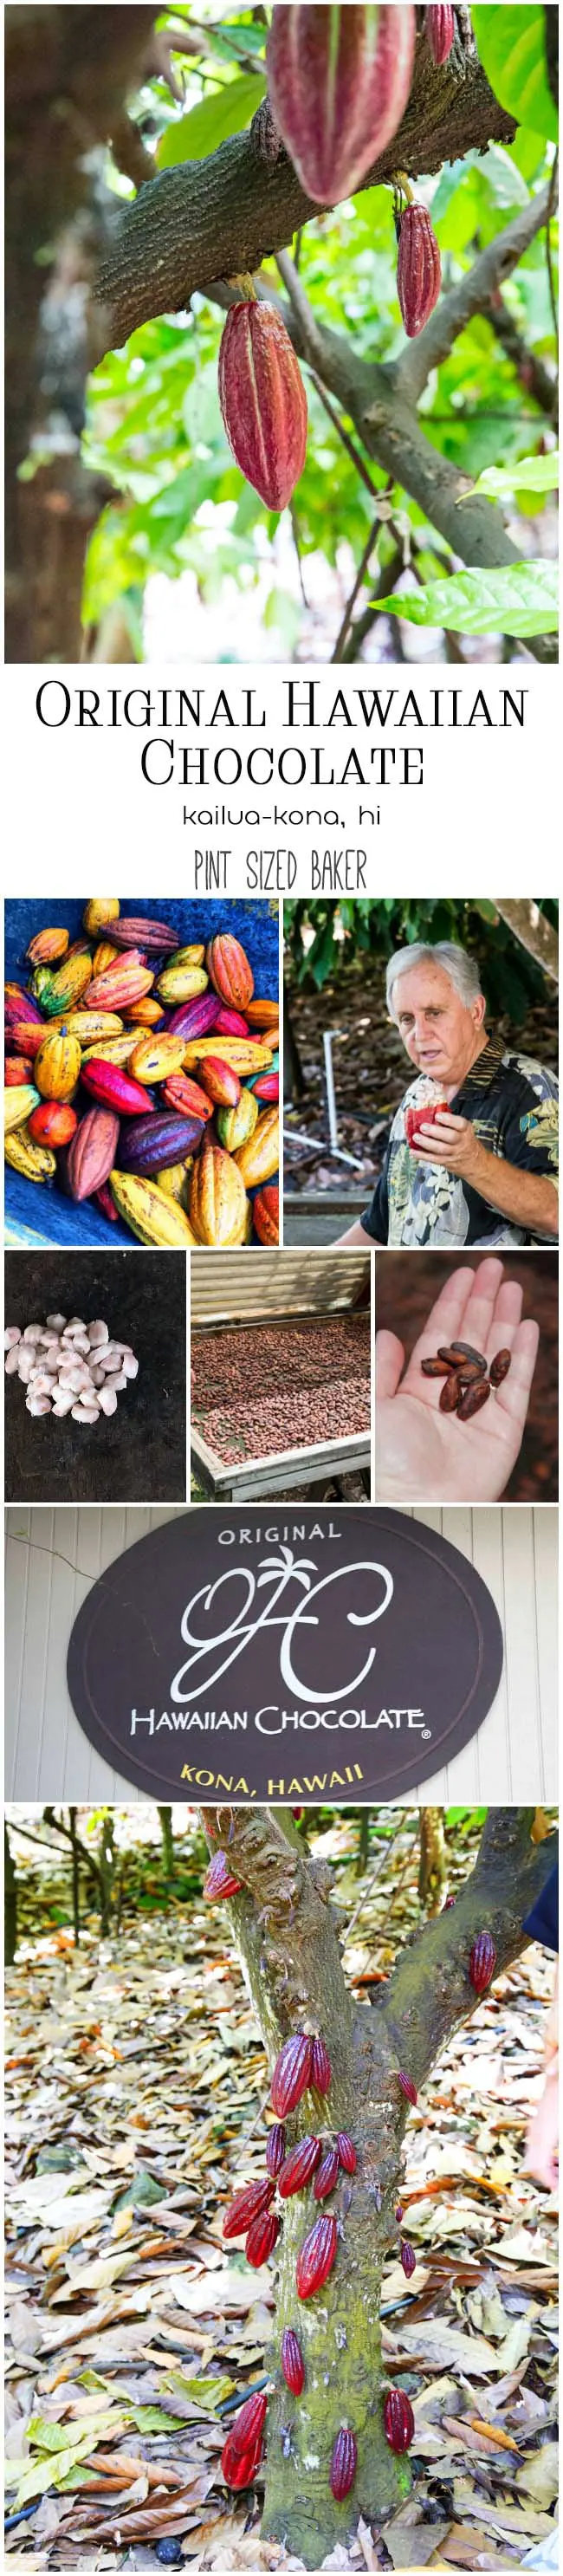 Ever see Cocoa Pods growing on a tree? It's a truly unique experience to explore the only chocolate farm in the United States. Take a leisurely afternoon to explore the Original Hawaiian Chocolate Plantation.